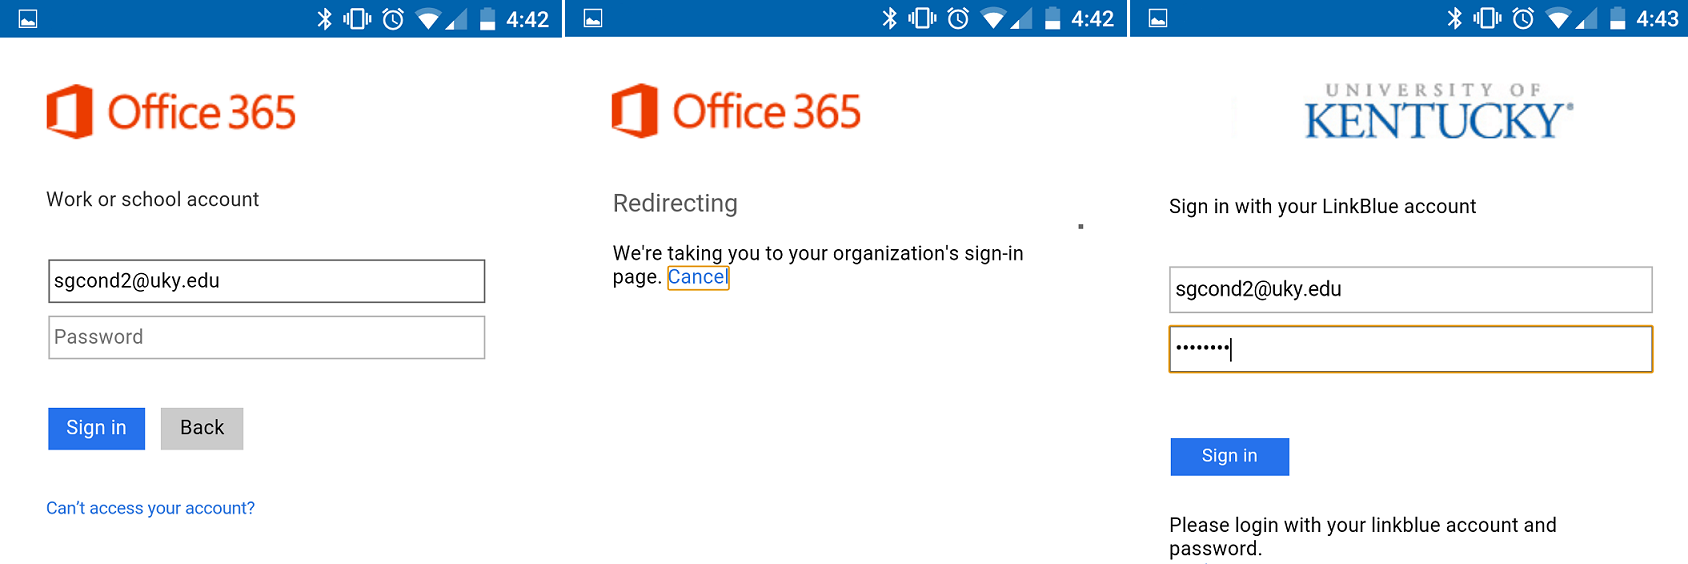 microsoft outlook sign in 365